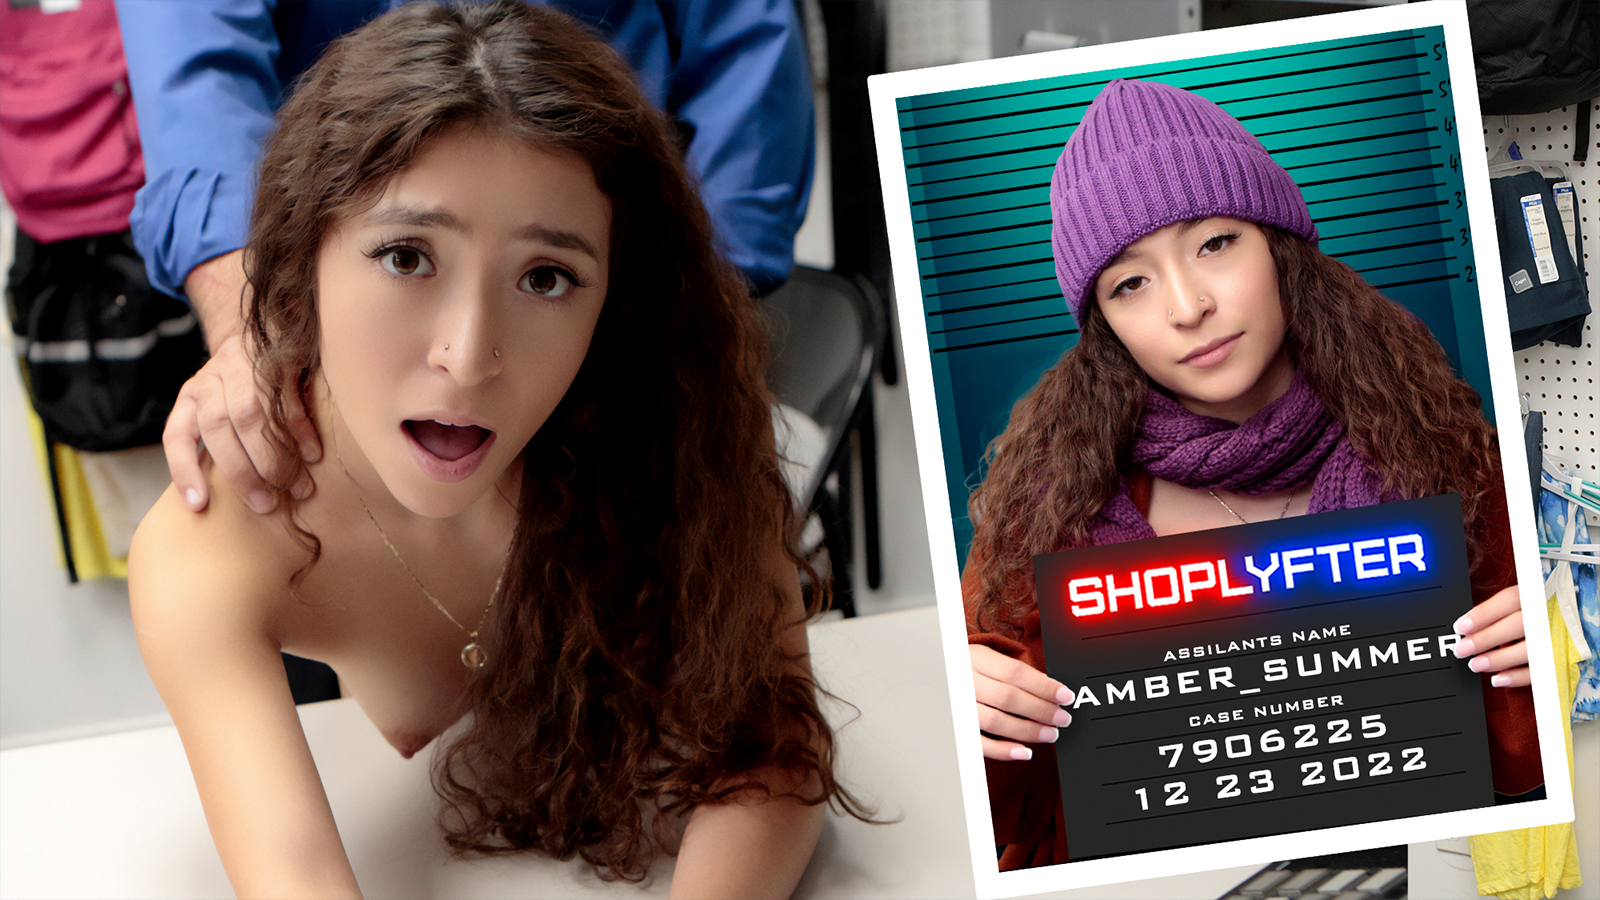 [Shoplyfter] Amber Summer (Case No. 7906225 – The Happy Holidays Thief)